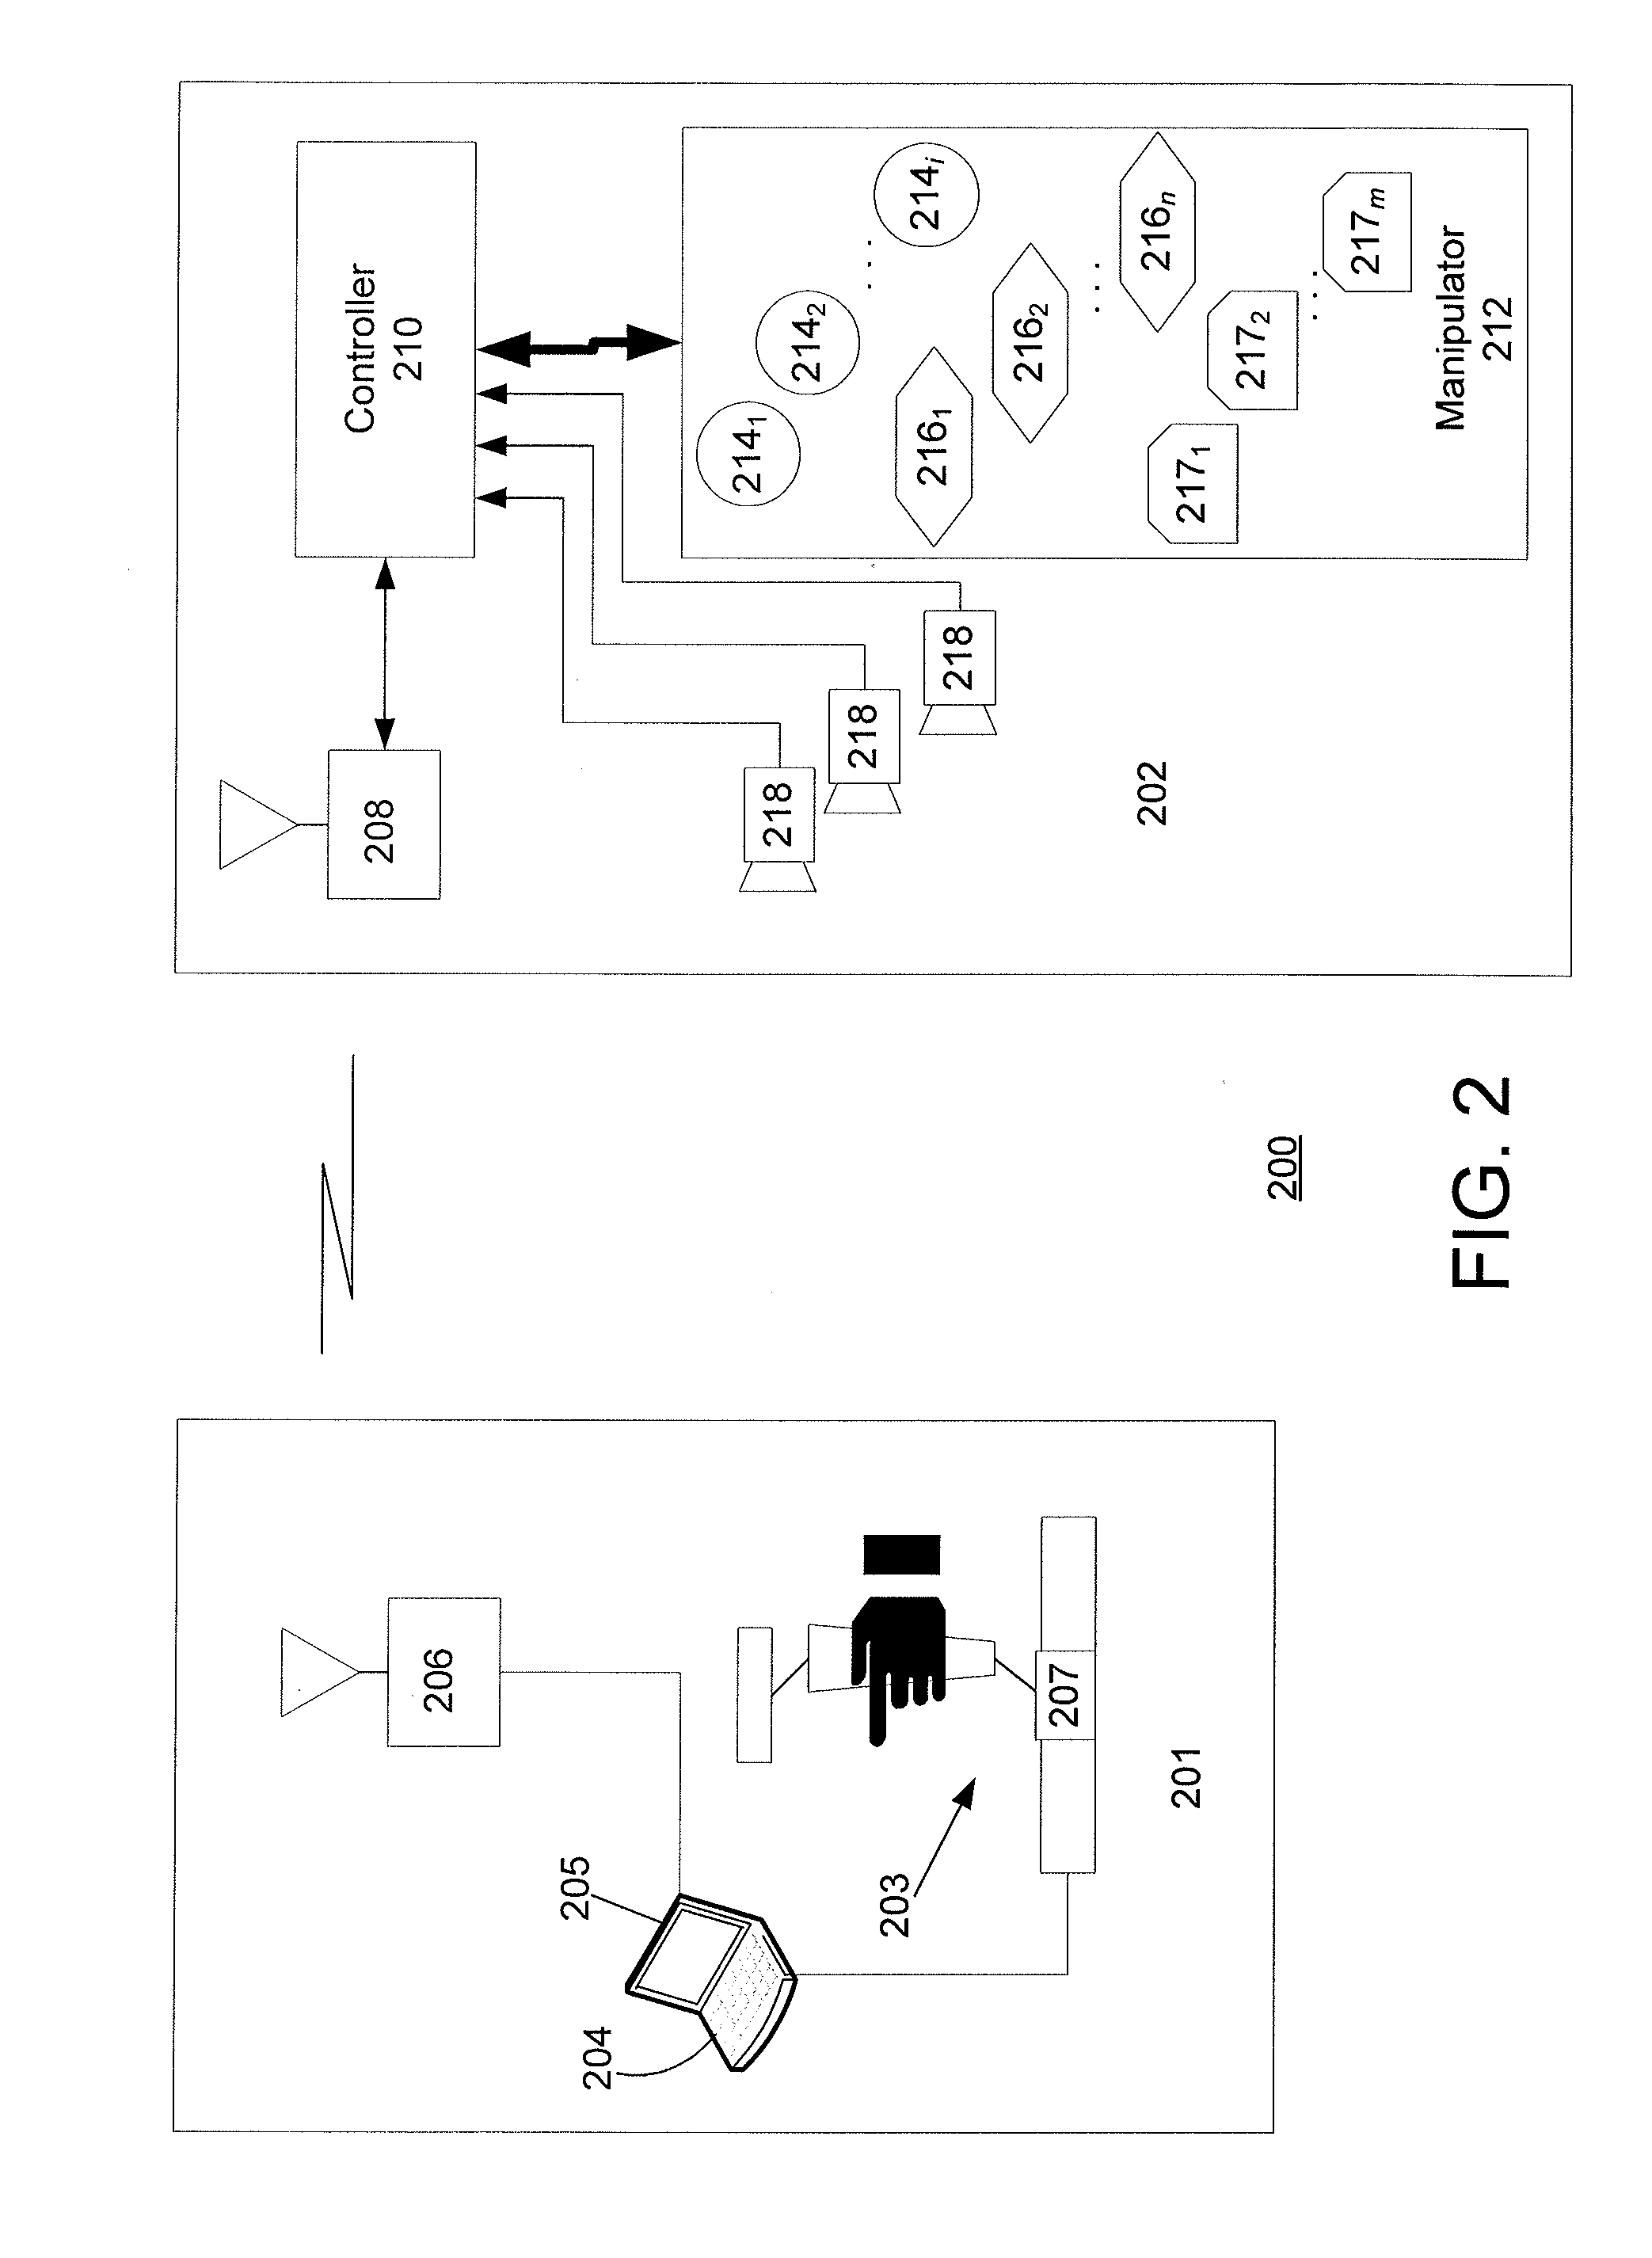 Telematic interface with control signal scaling based on force sensor feedback